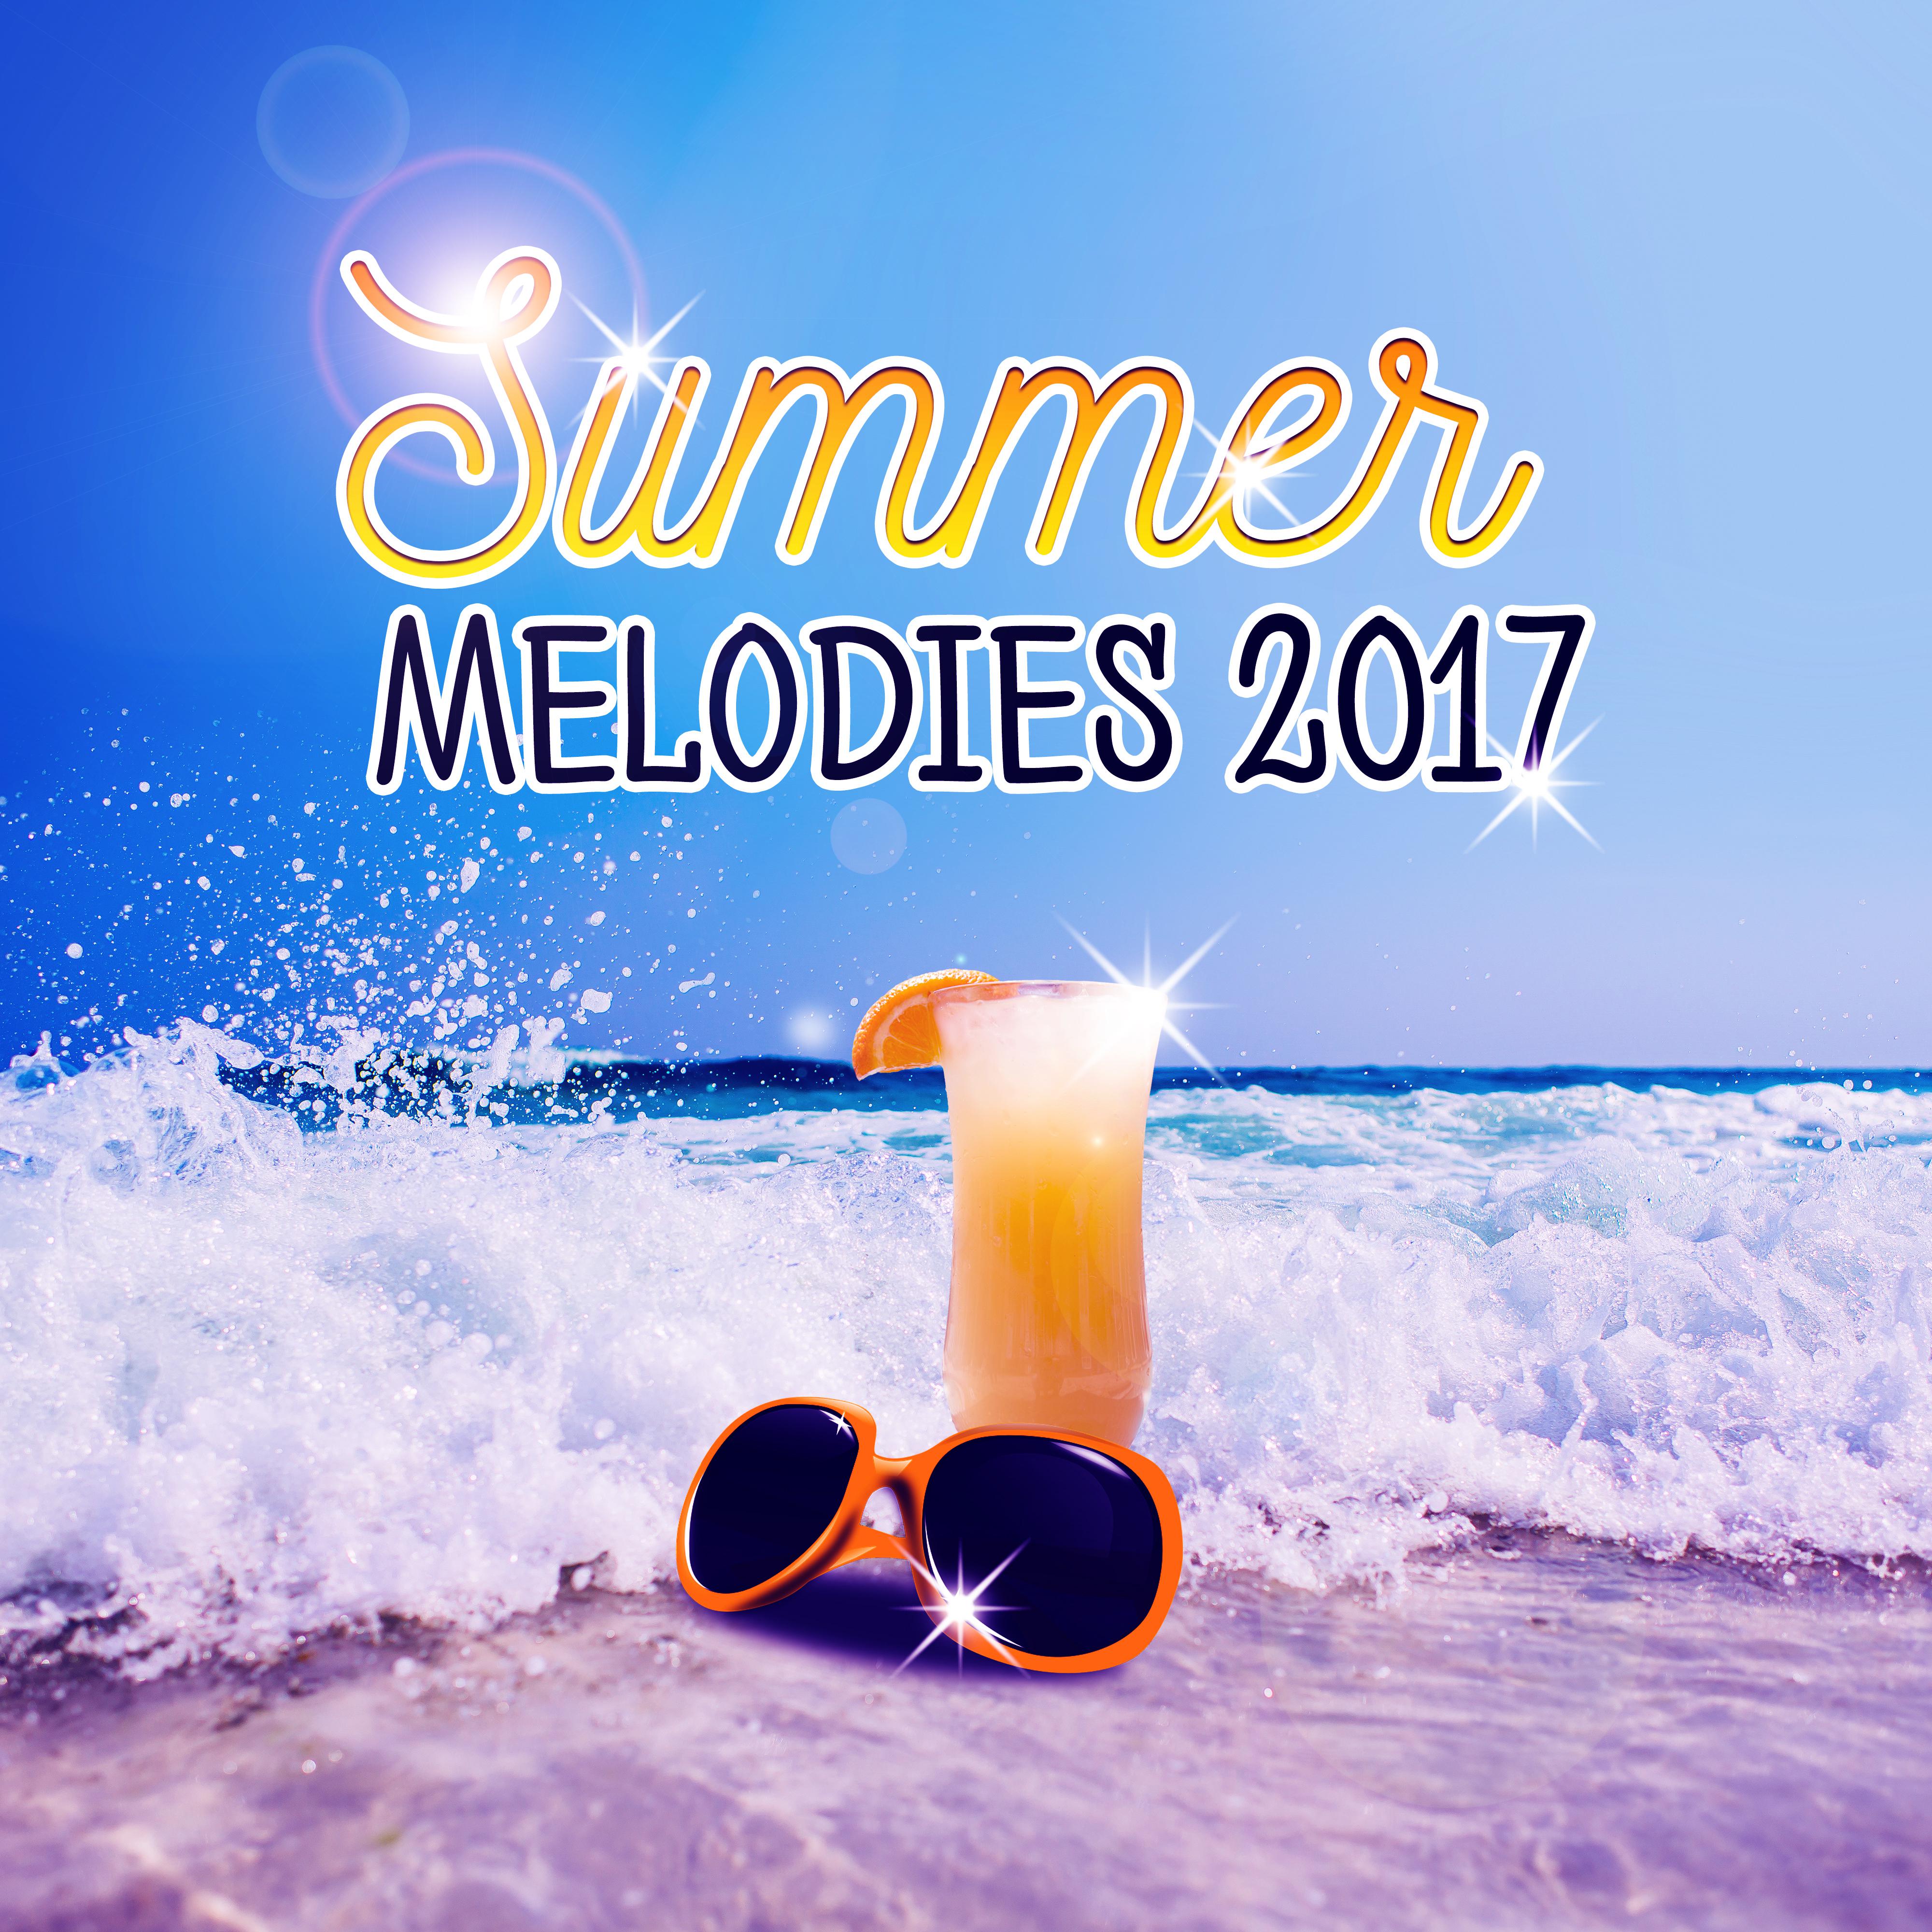 Summer Melodies 2017 – Chill Out Music, Stress Relief, Calm Down, Ibiza Rest, Peaceful Music